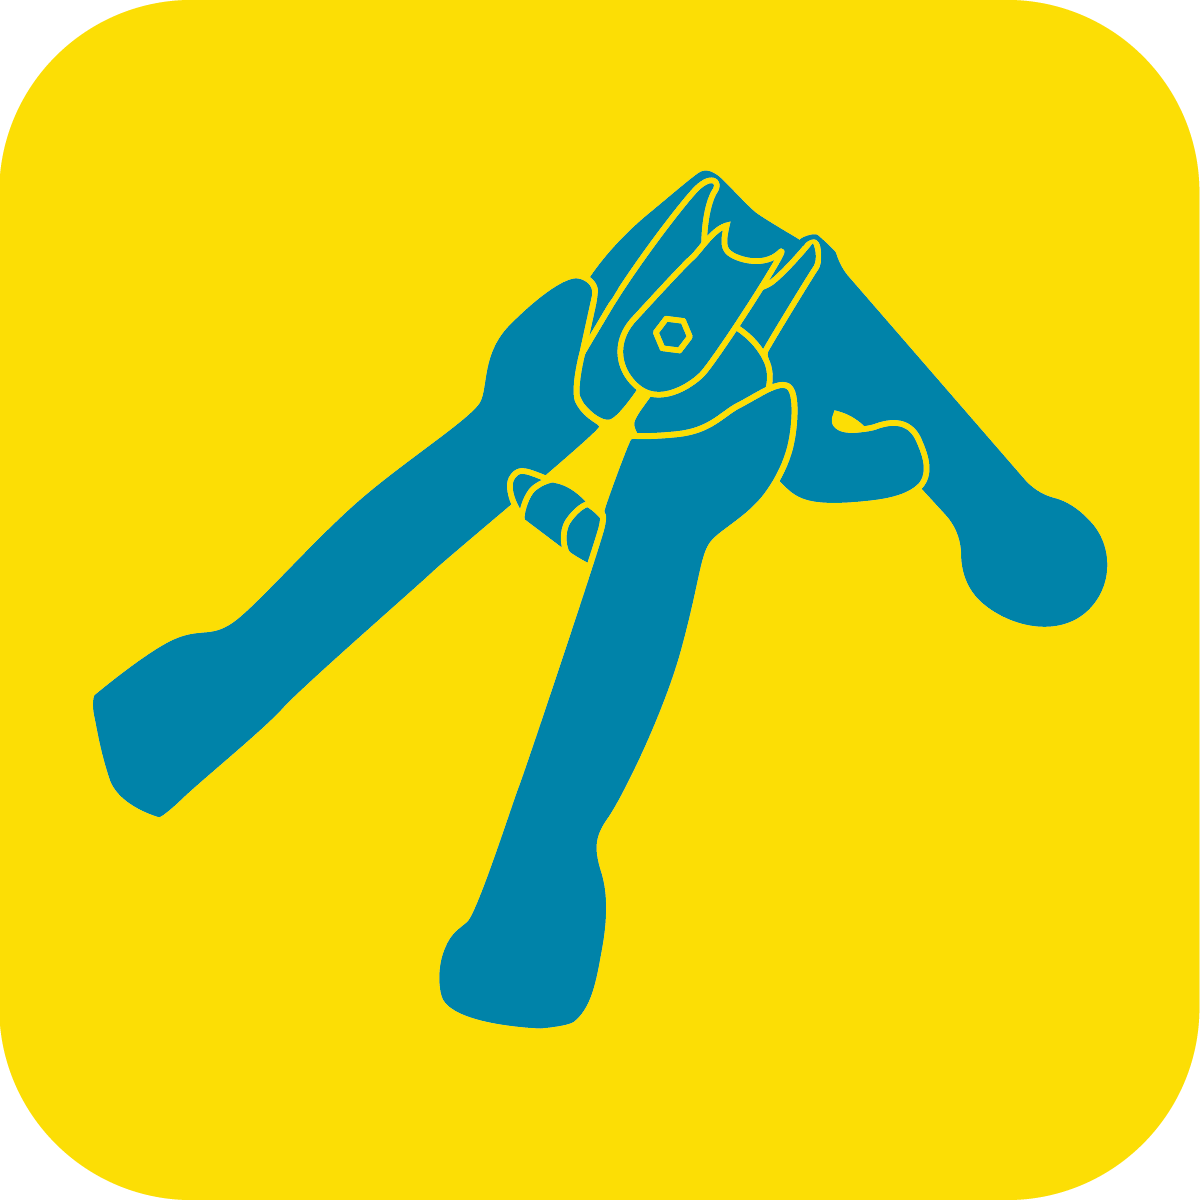 Fence and garden pliers icon